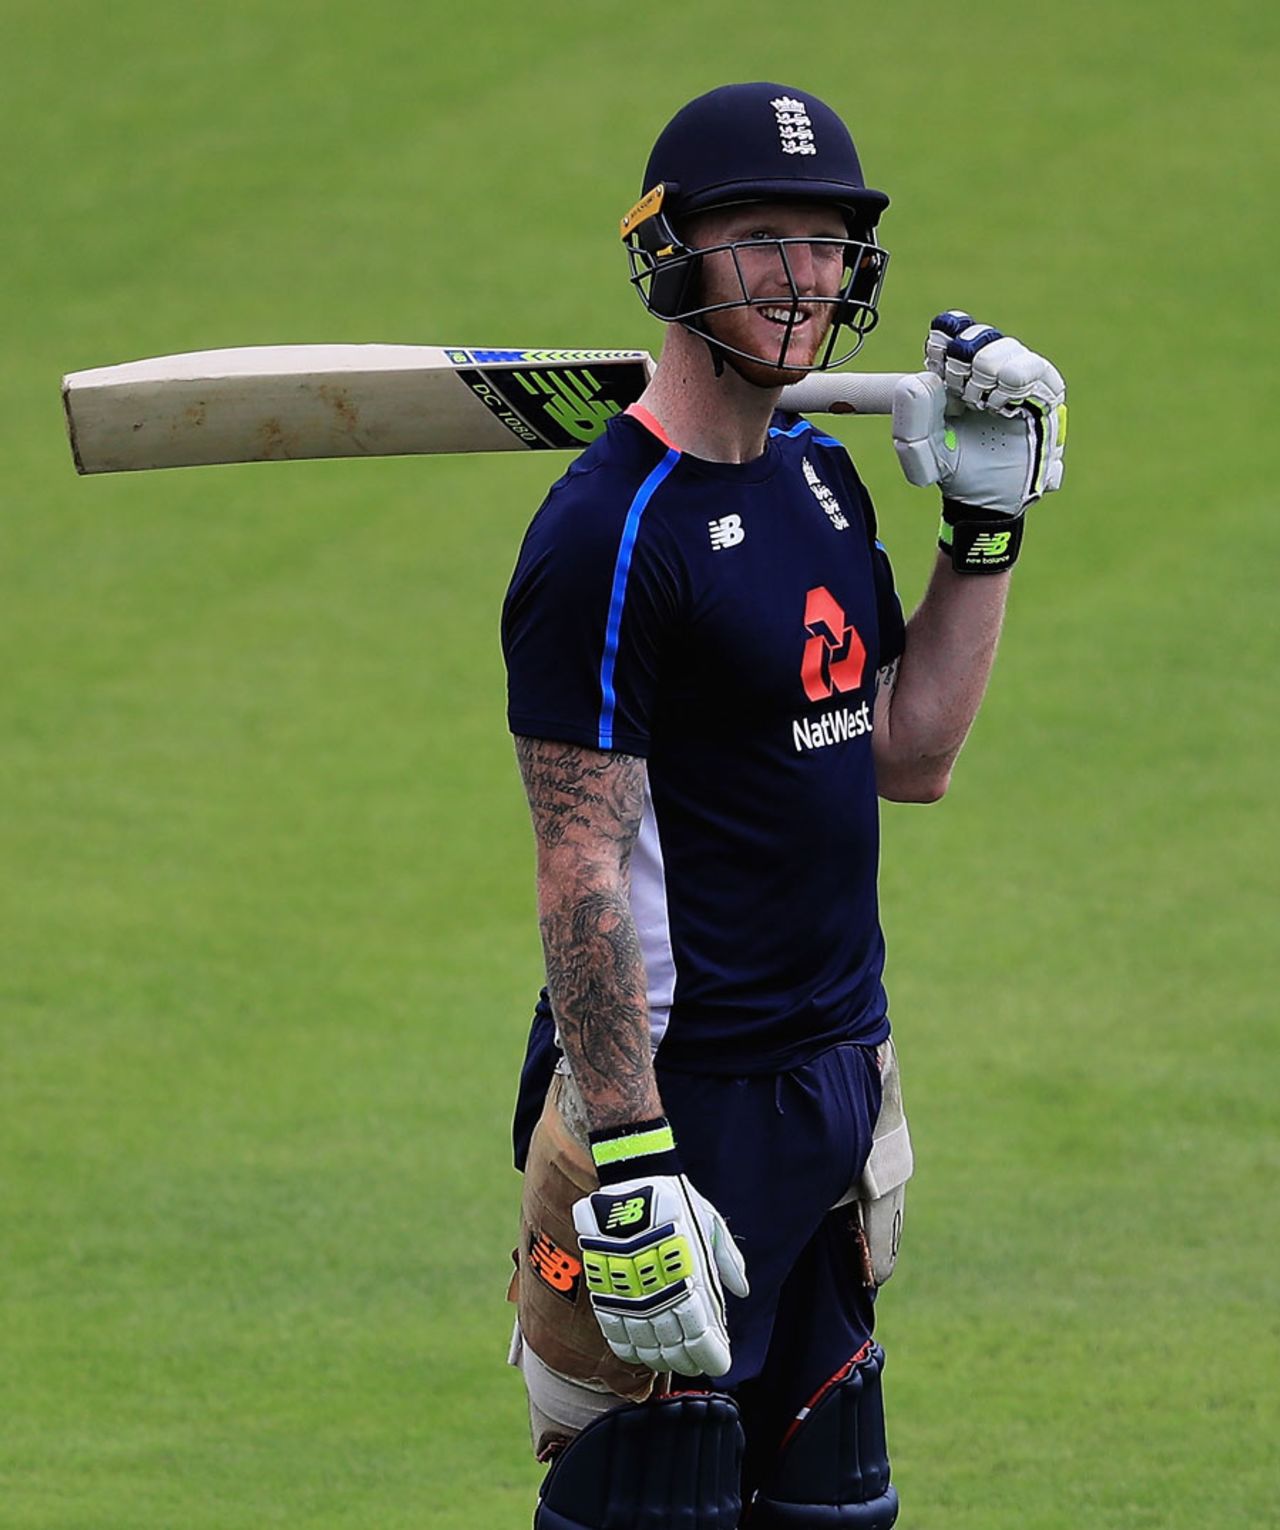 Ben Stokes was back with England after a successful IPL, Headingley, May 22, 2017